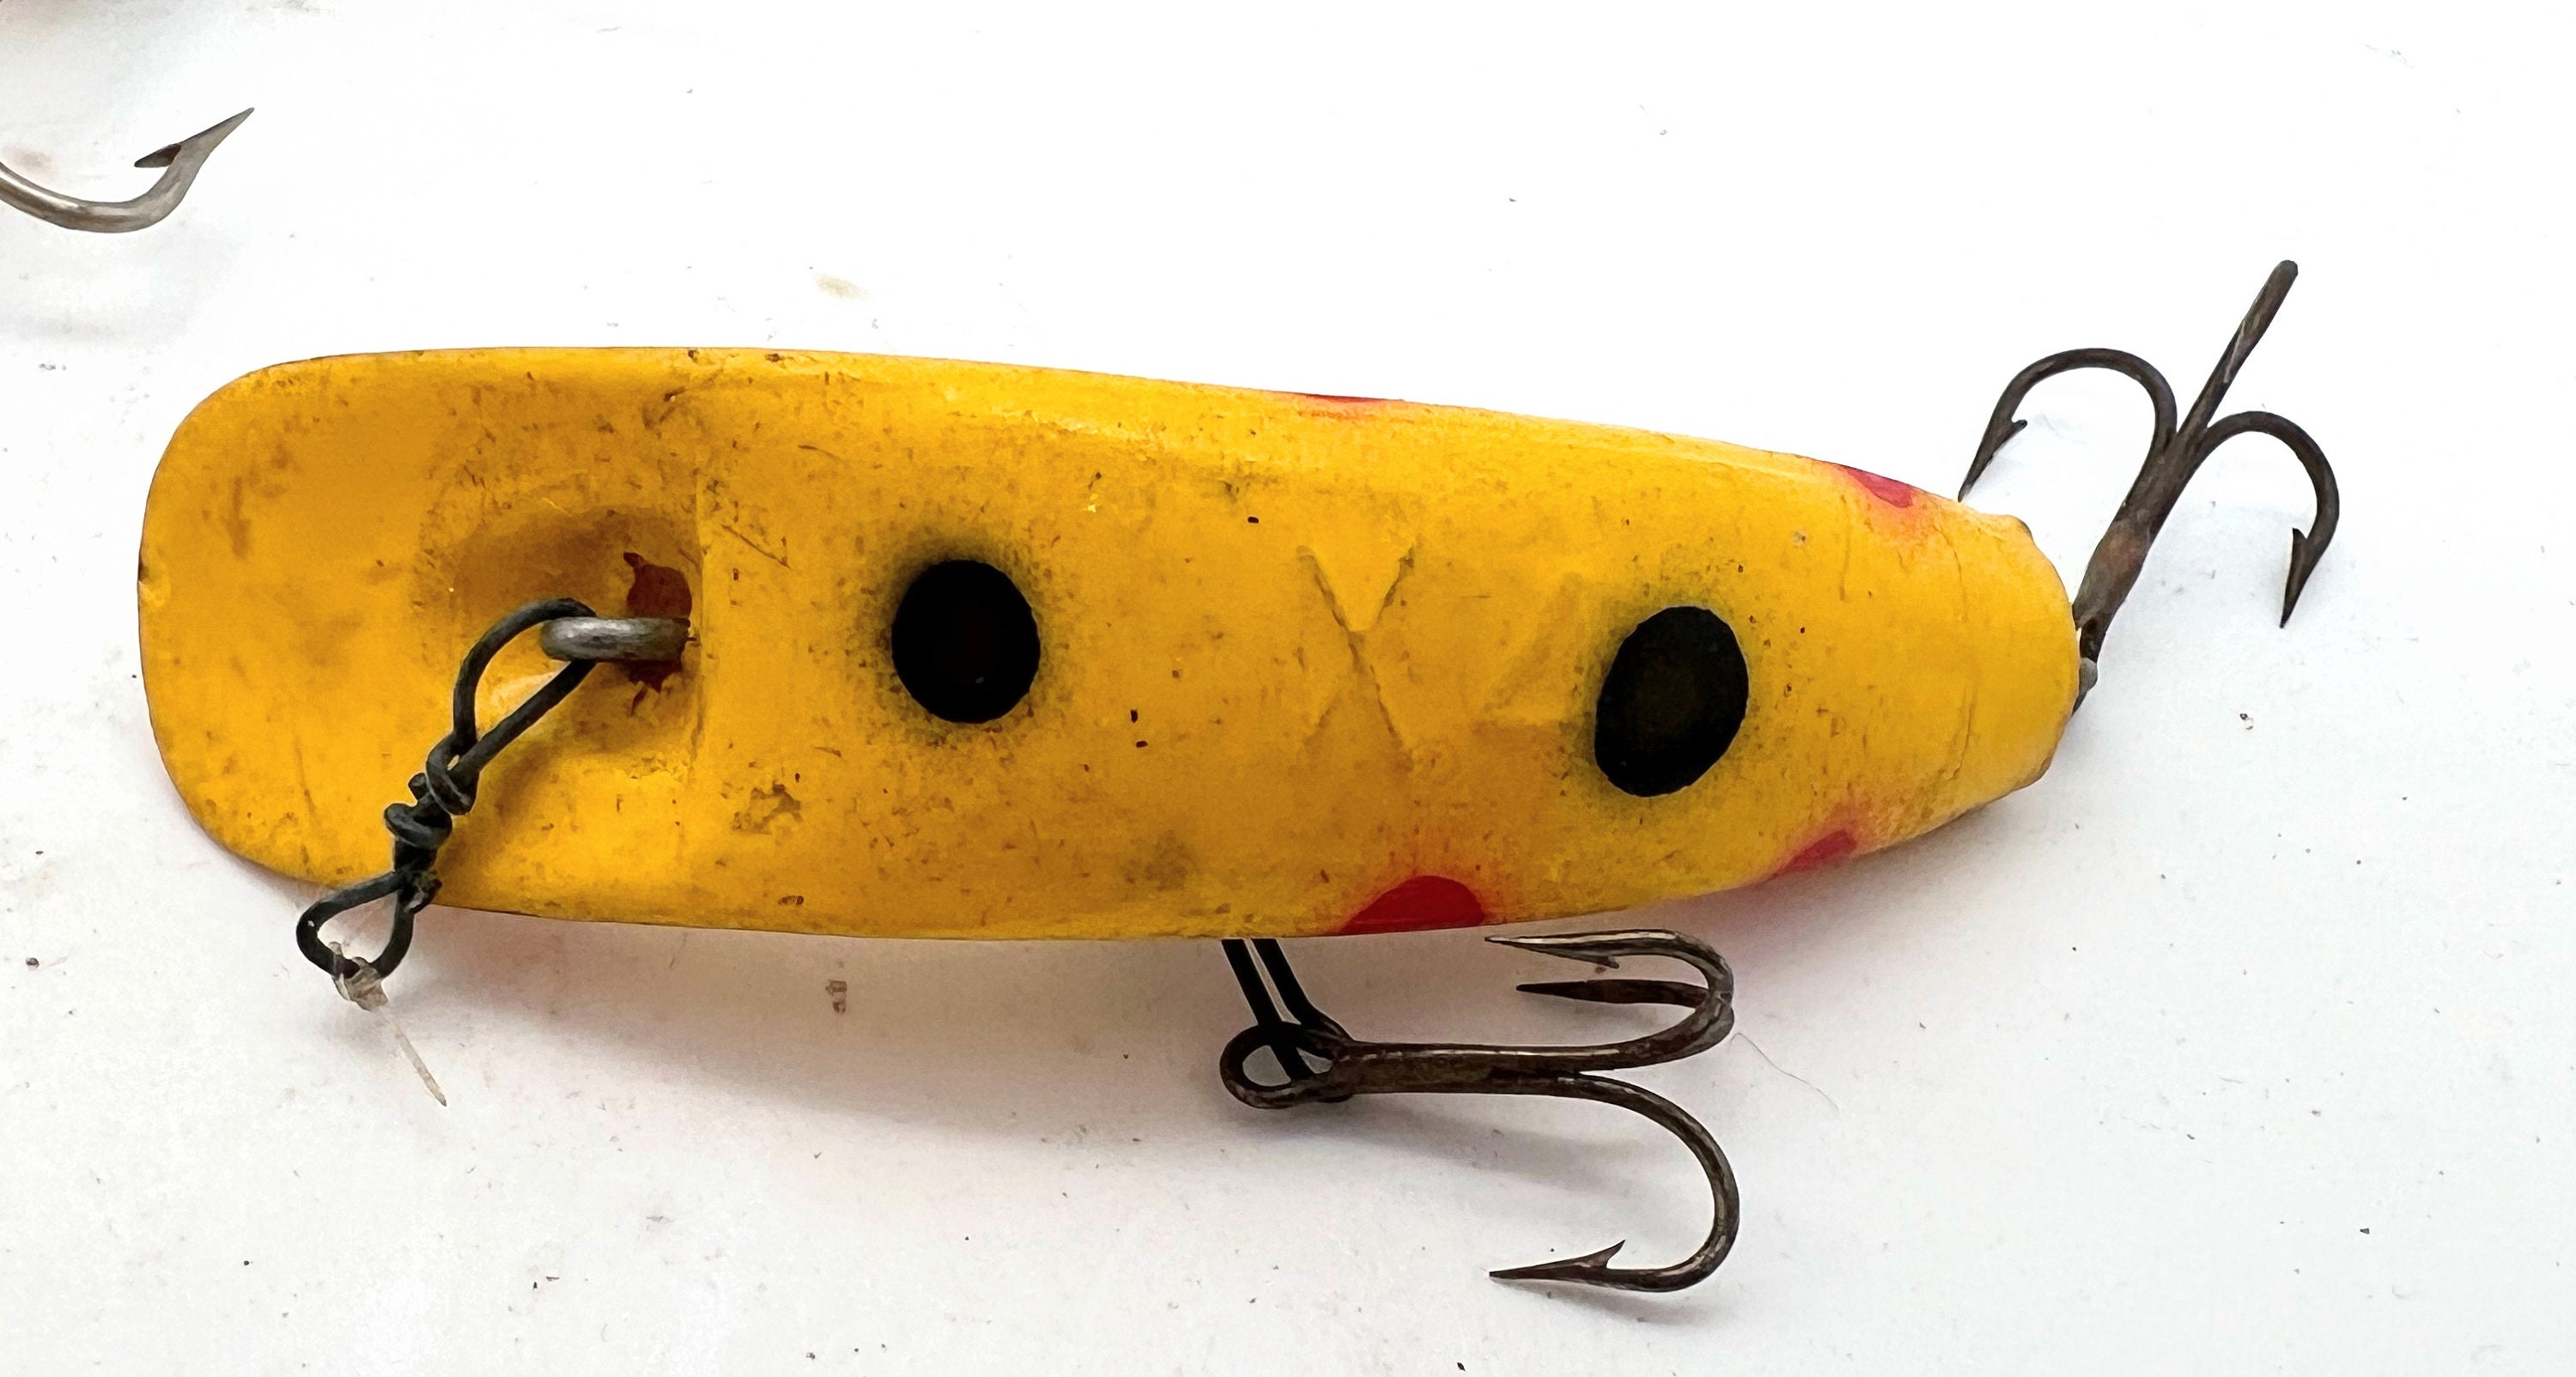 Pin by fredolabarrique on vadrouille (s)  Custom fishing lure, Antique  fishing lures, Fishing hook knots